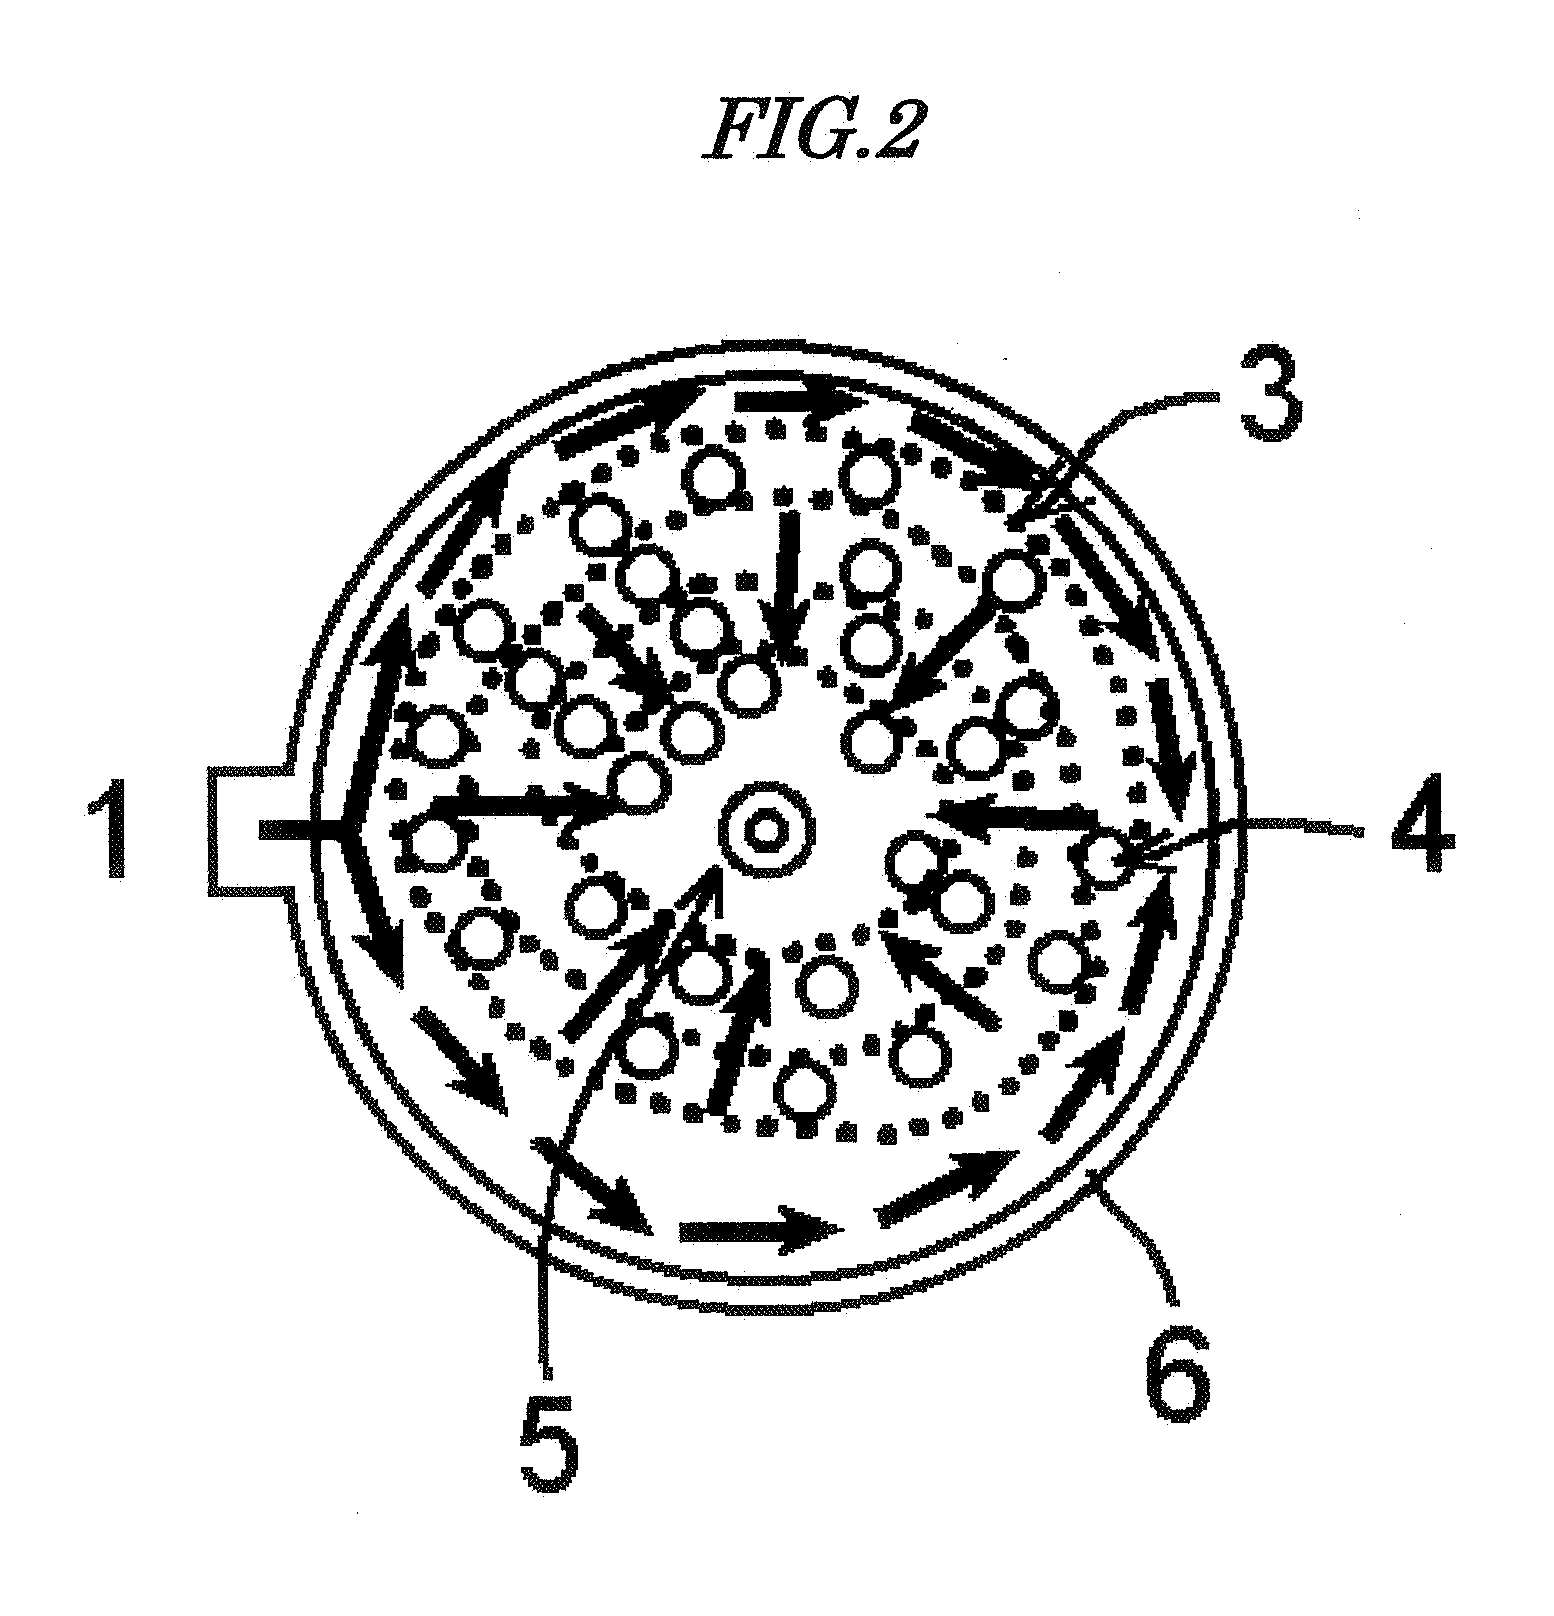 Porous Sheet-Form Material For Cell Culture, And Bioreactor And Culturing Method Utilizing Same